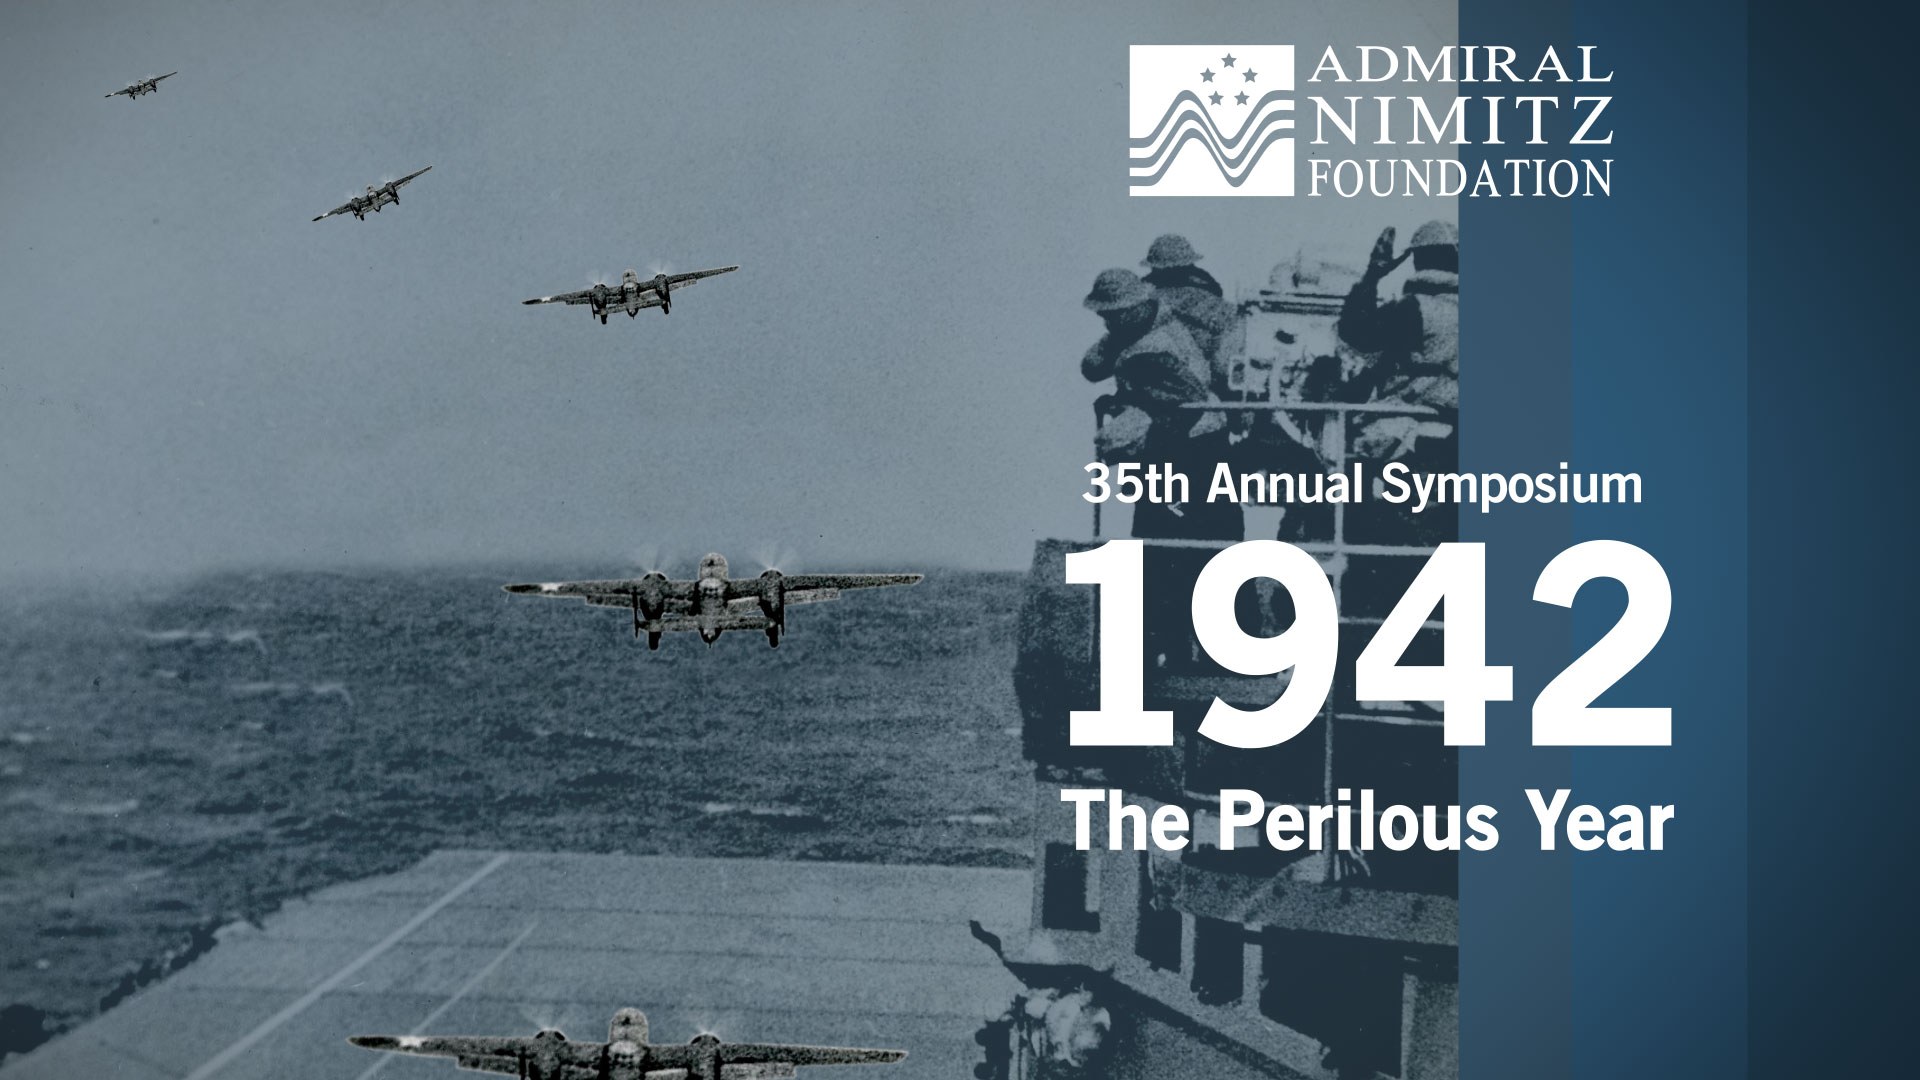 1942 The Perilous Year